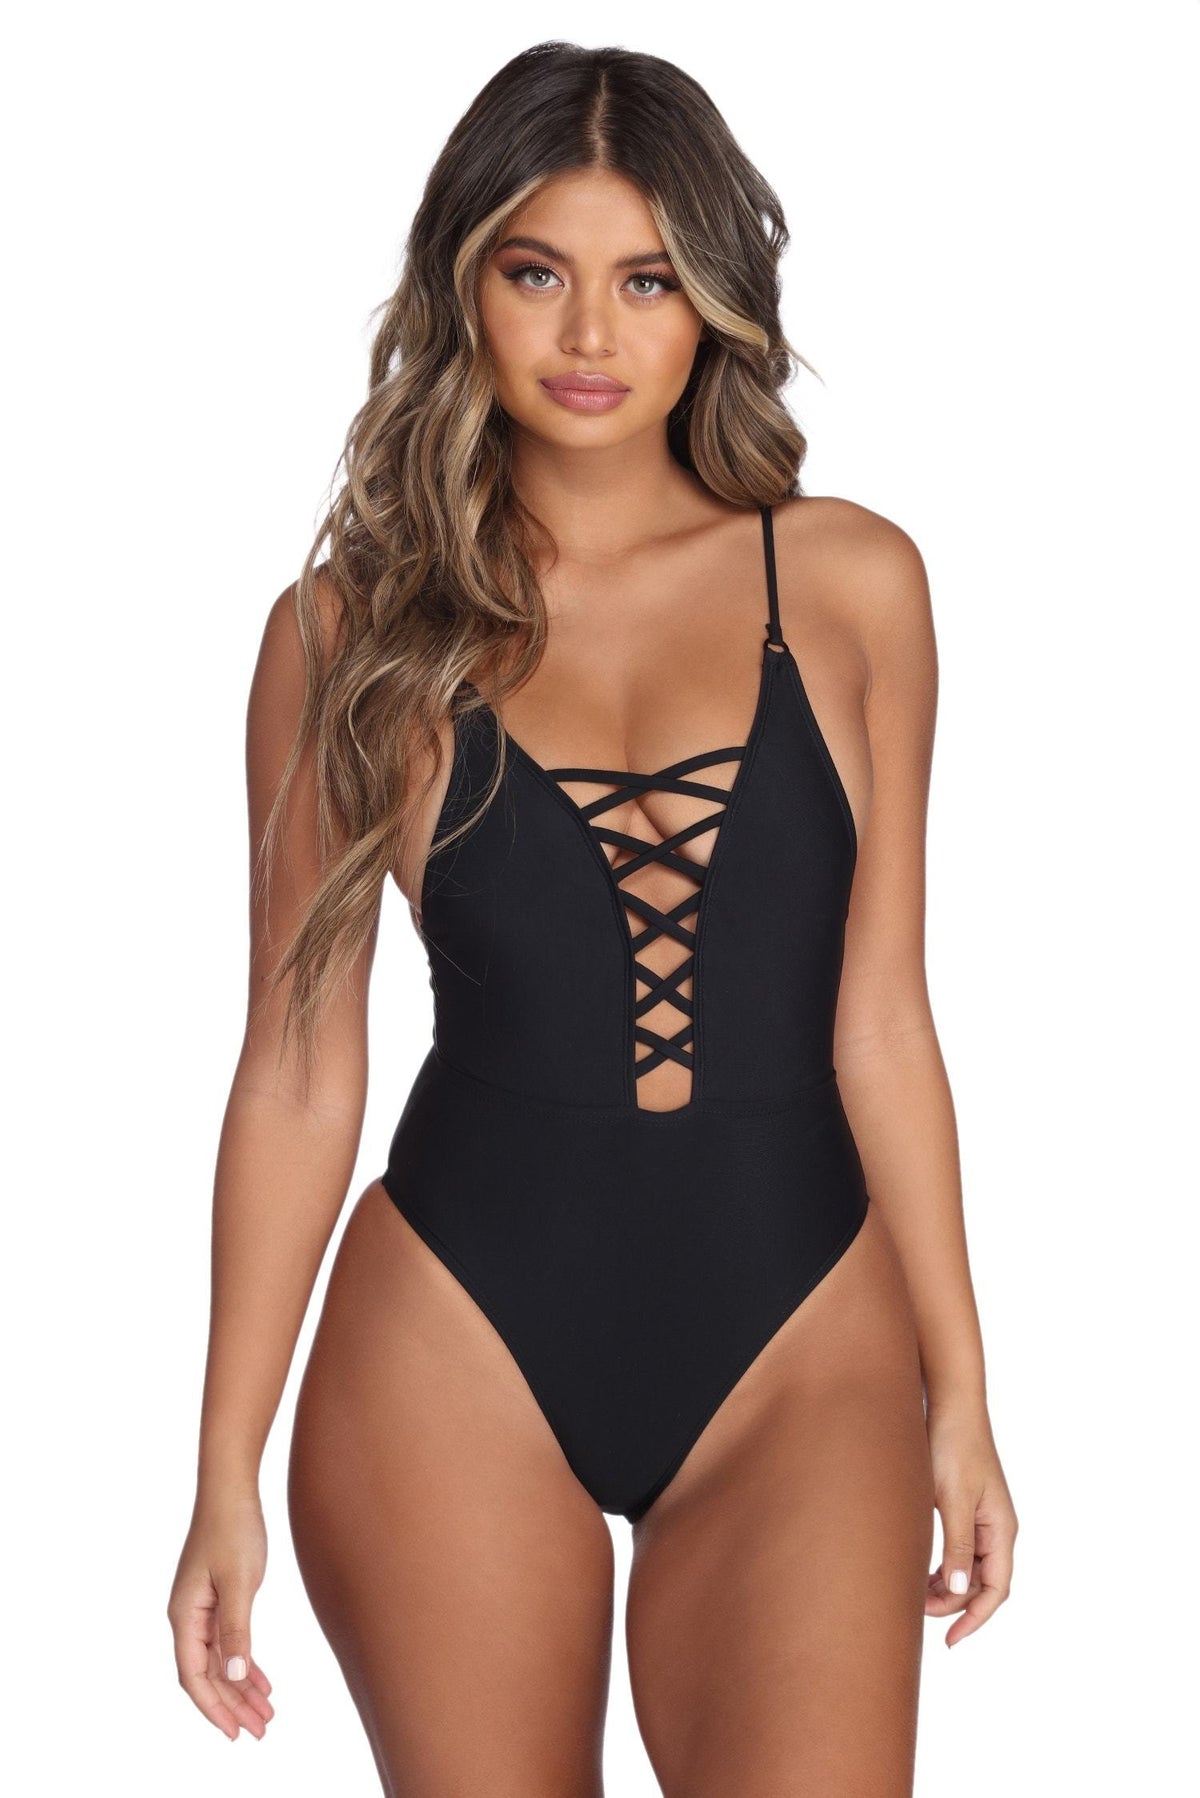 Sleek And Strappy Swimsuit